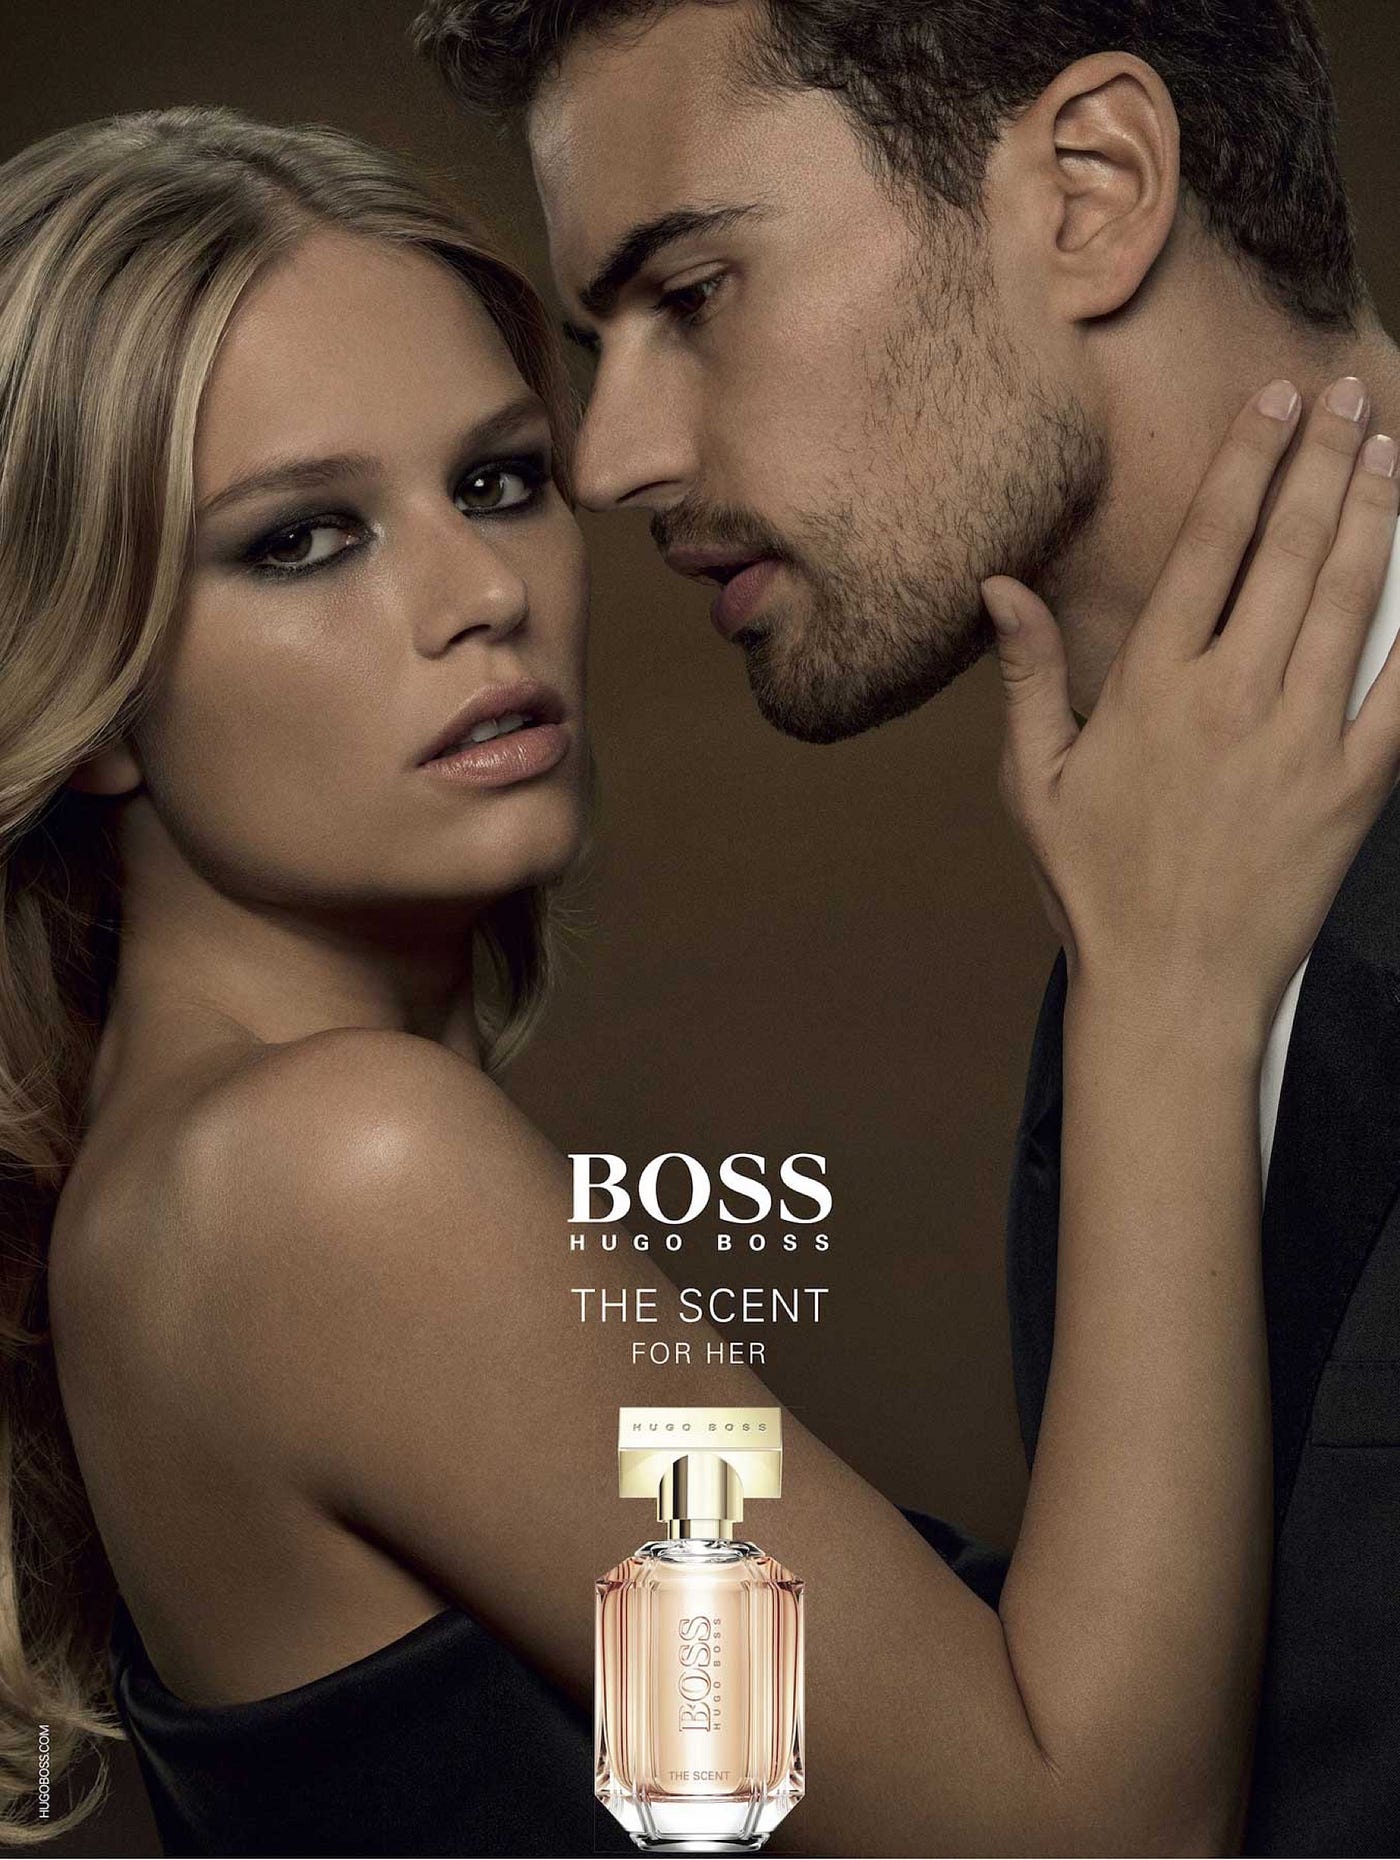 First Look: Official Boss The Scent for Her Promo Poster with Theo James  and Anna Ewers | by Johanna Romero | The Theologians — Theo James News Site